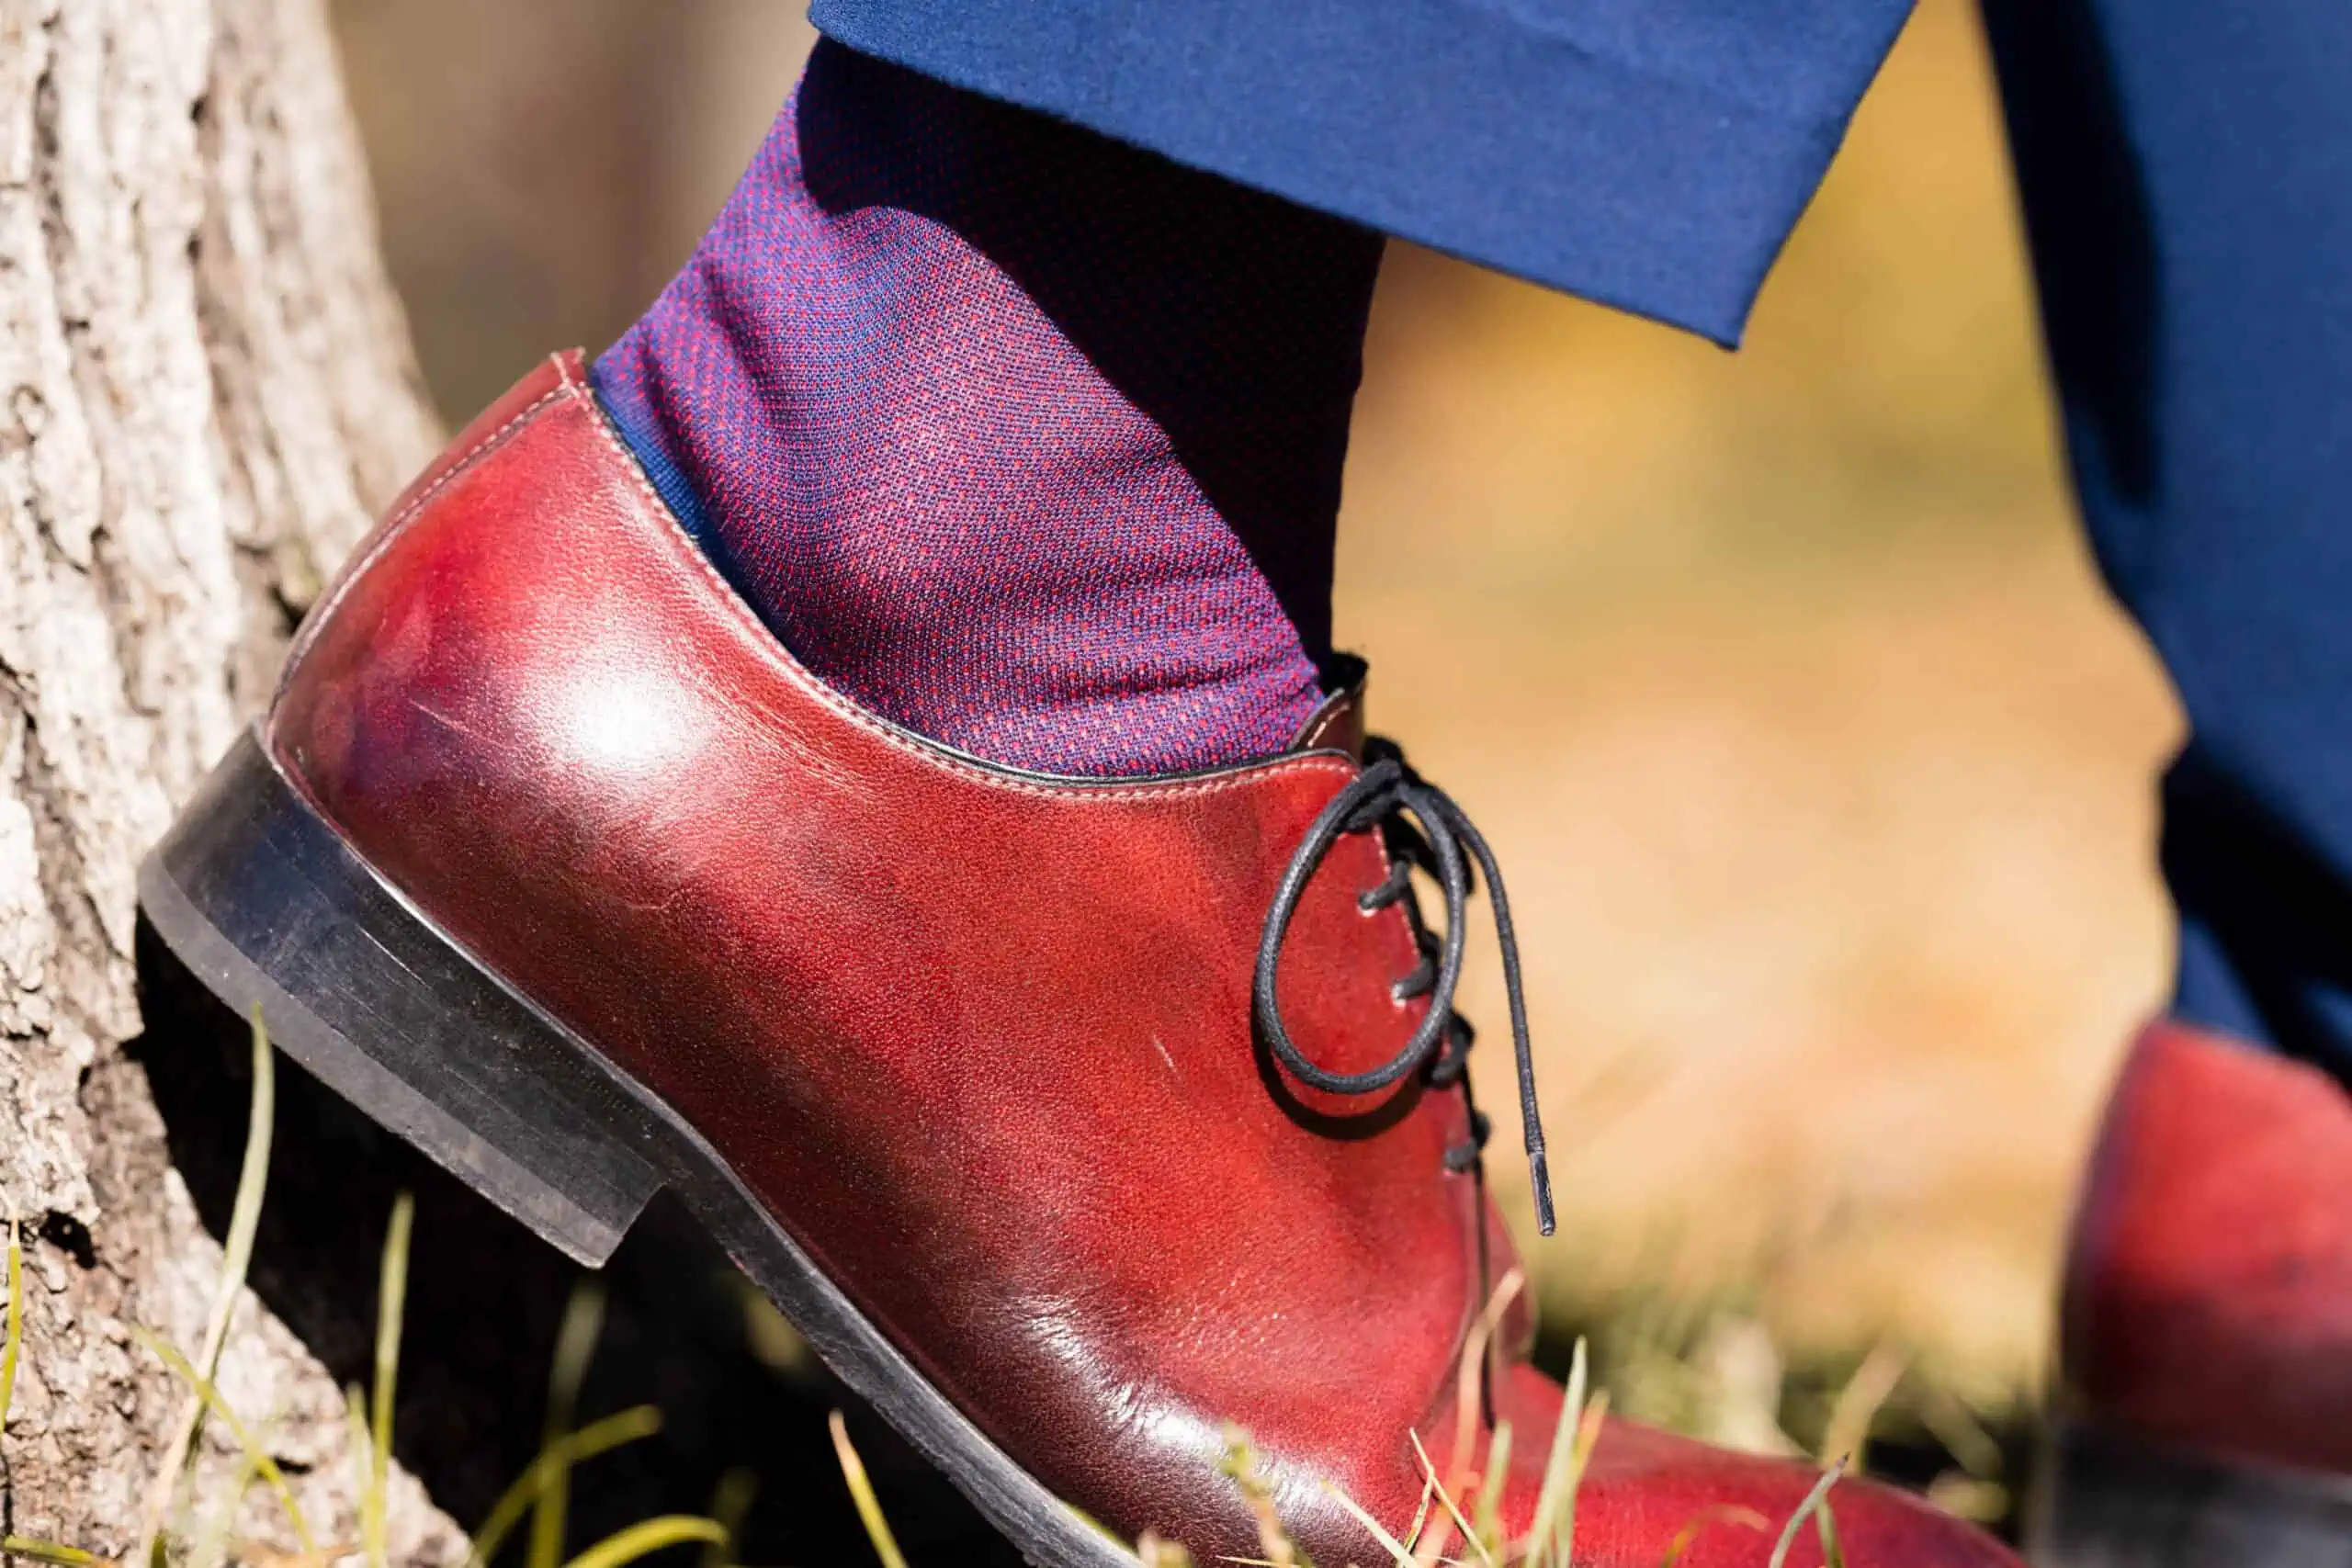 Close up of oxblood shoes with red and blue socks and a blue trouser cuff